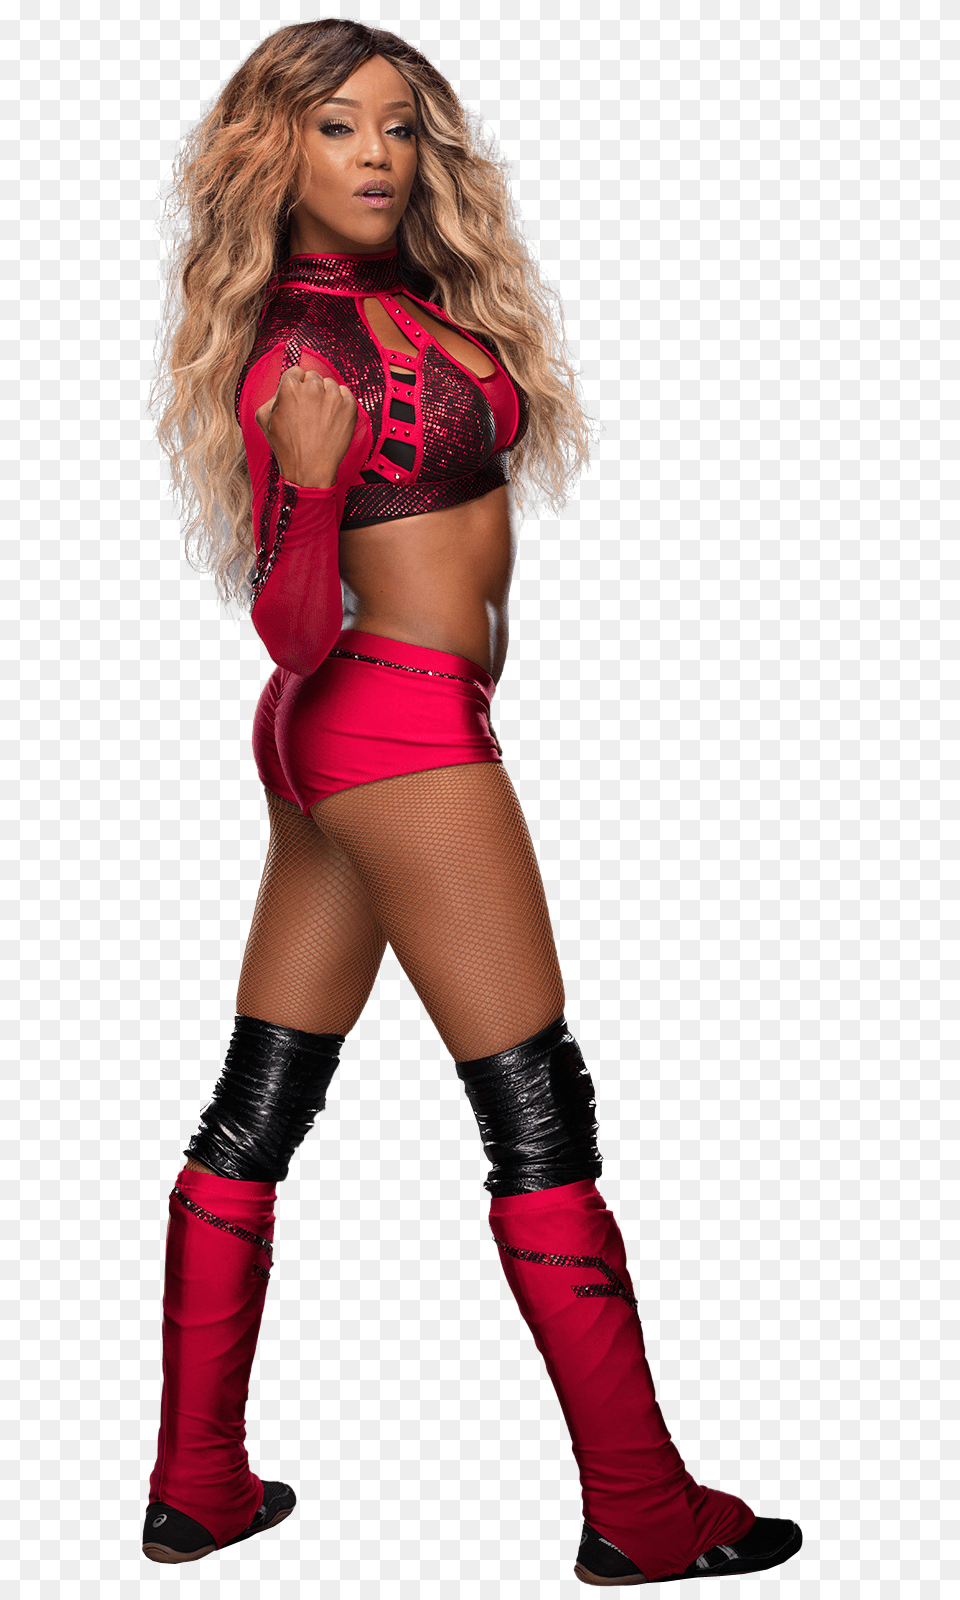 Alicia Fox Pictures Download, Shoe, Person, Clothing, Costume Png Image